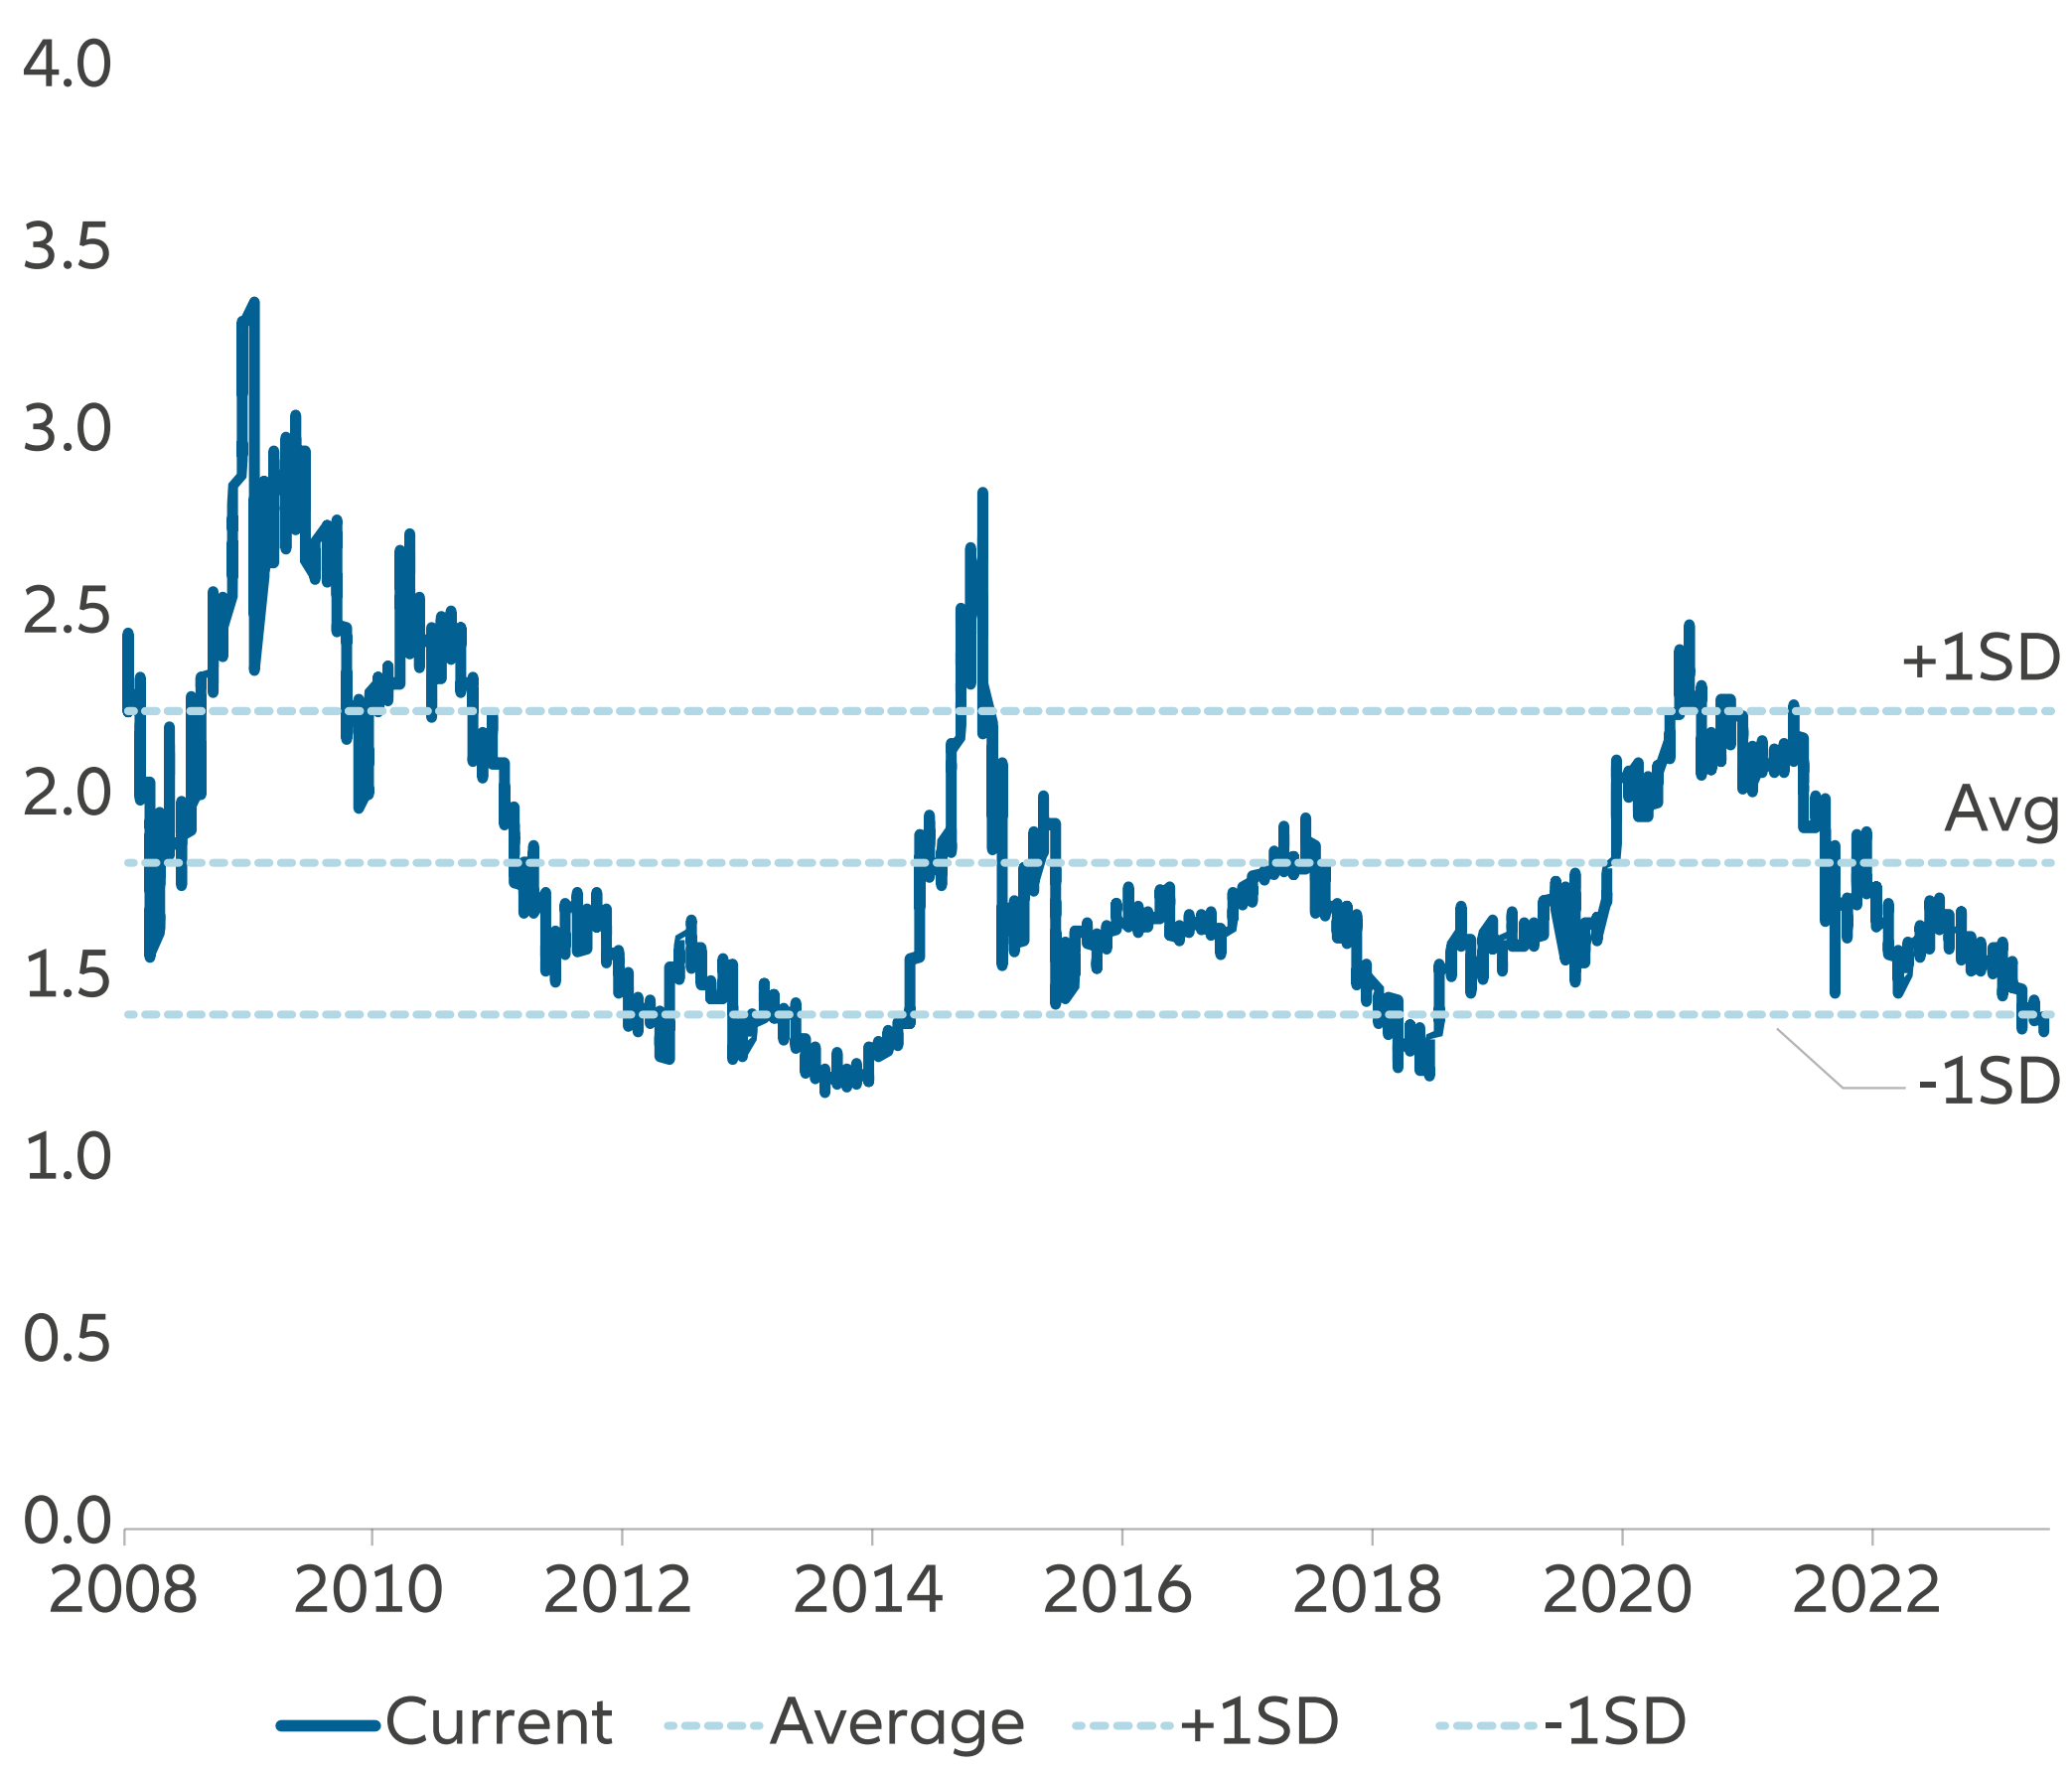 Exhibit 8: MSCI China A Onshore – Price to Book Ratio